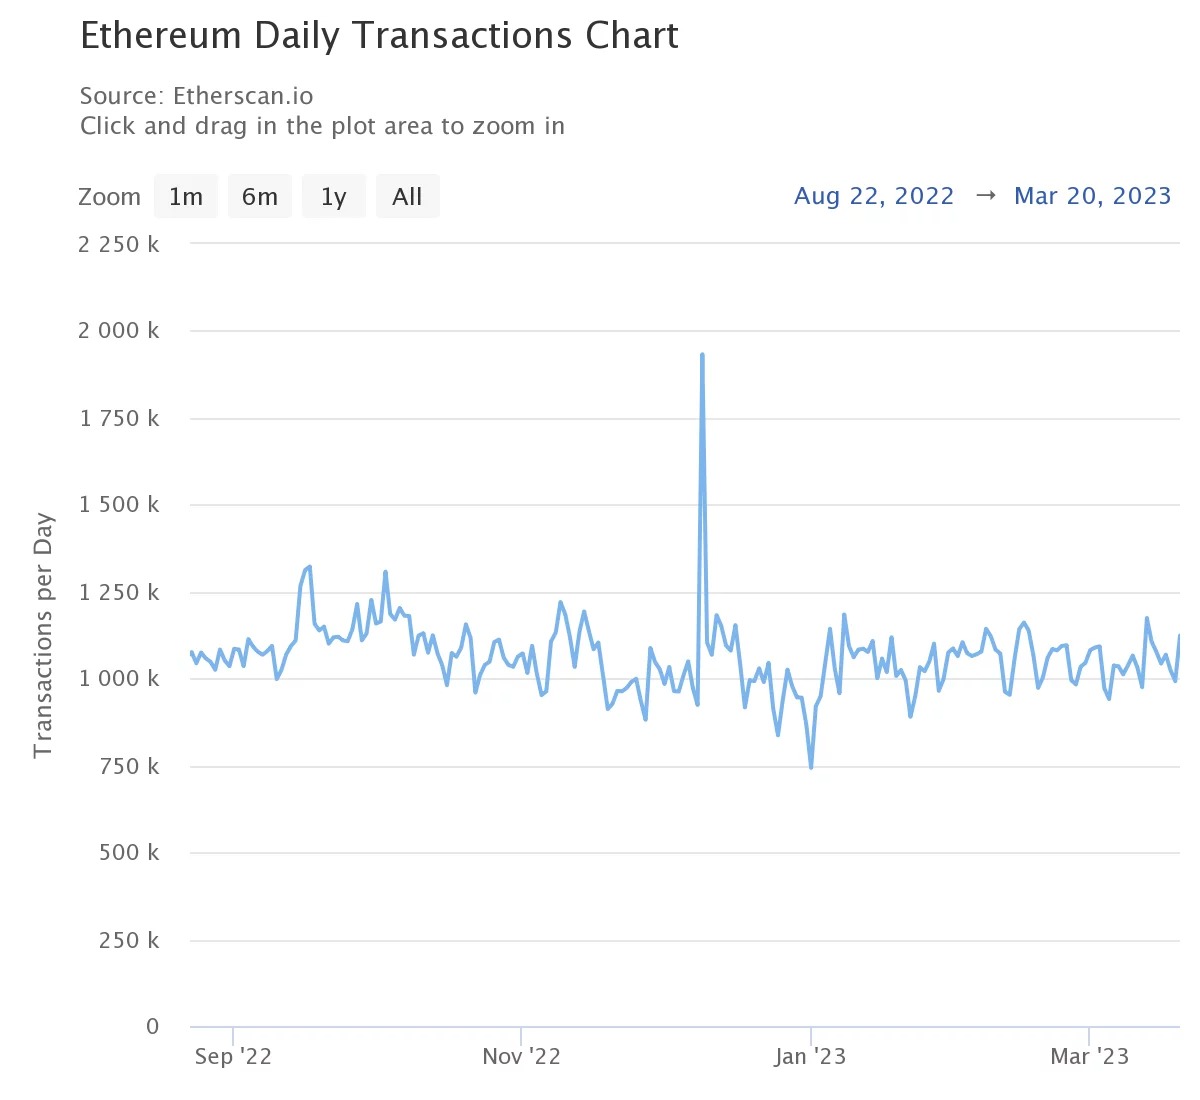 Figure 2 - Daily transactions on Ethereum